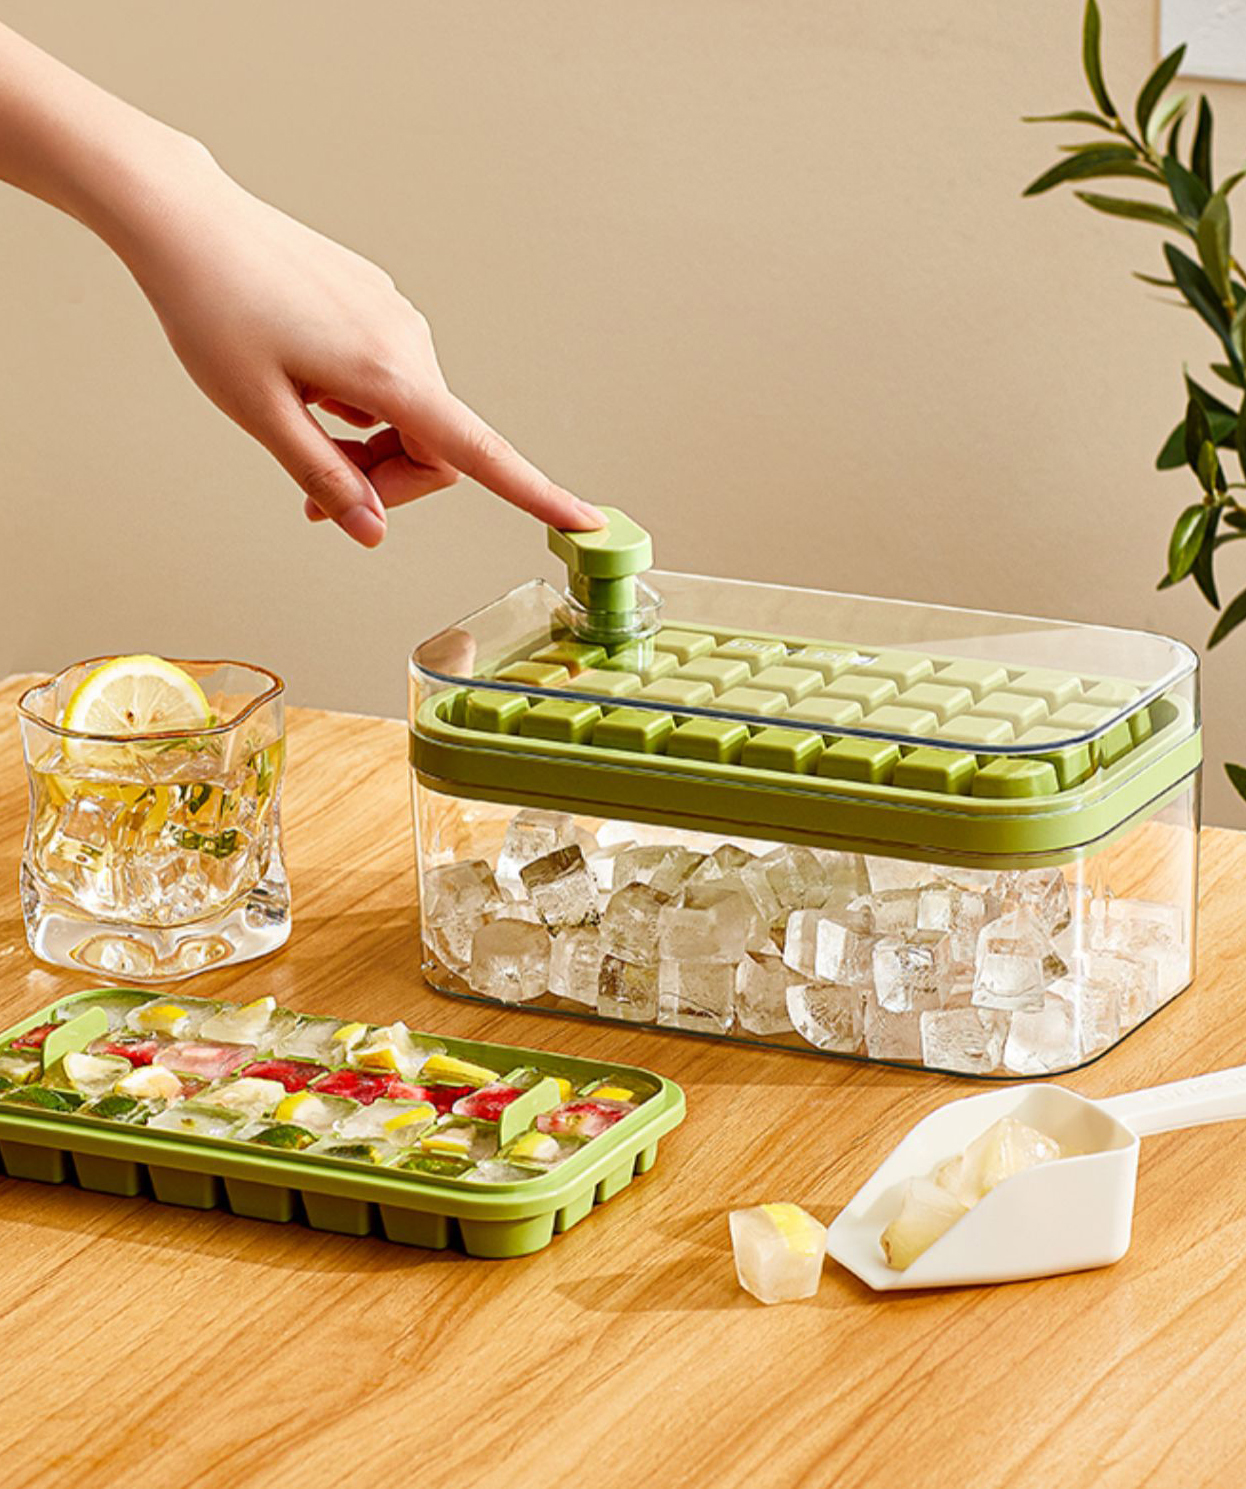 Ice mold, 64 compartments, green